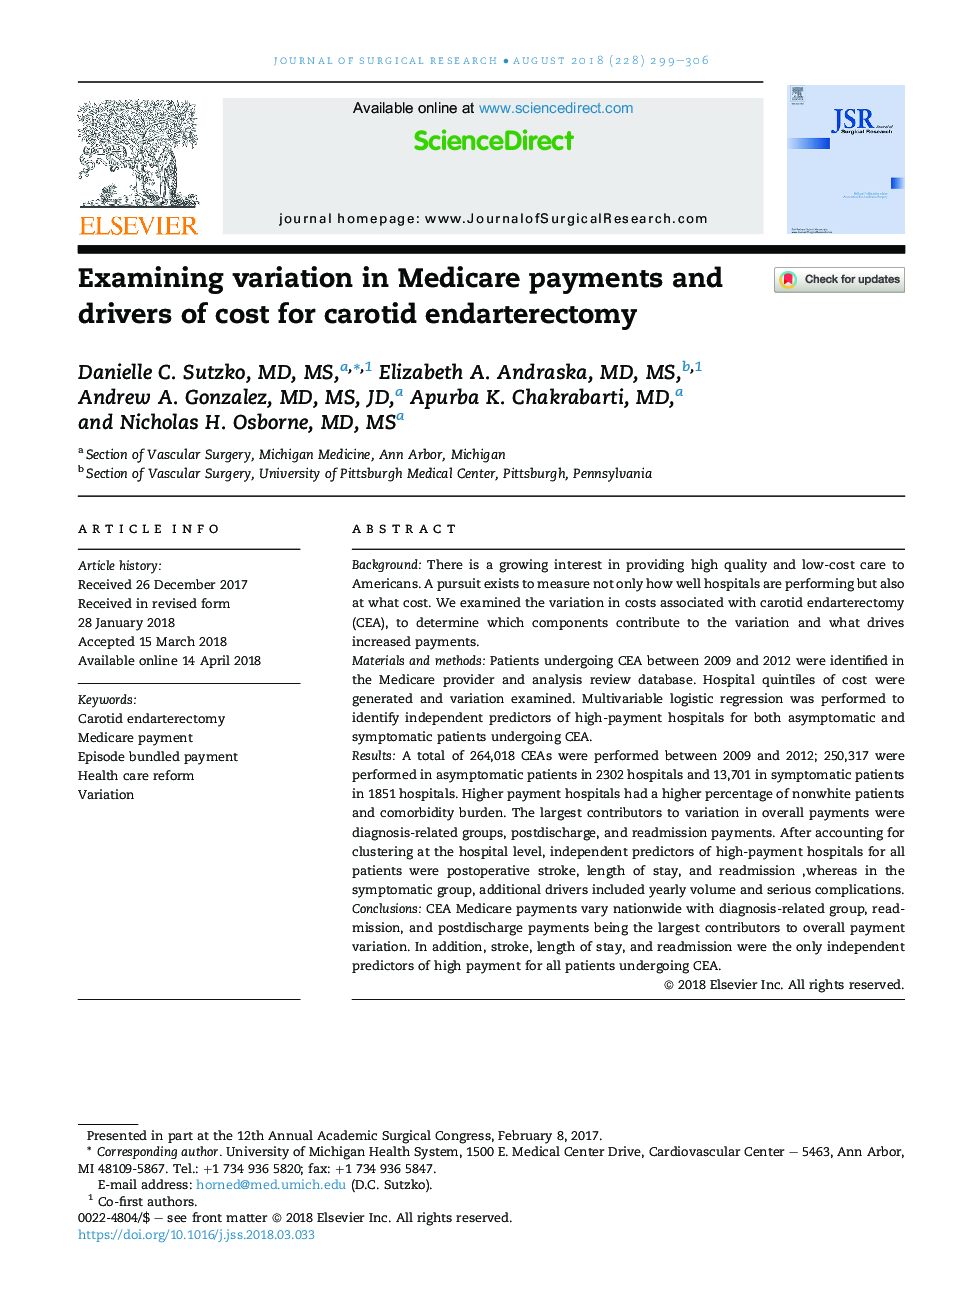 Examining variation in Medicare payments and drivers of cost for carotid endarterectomy